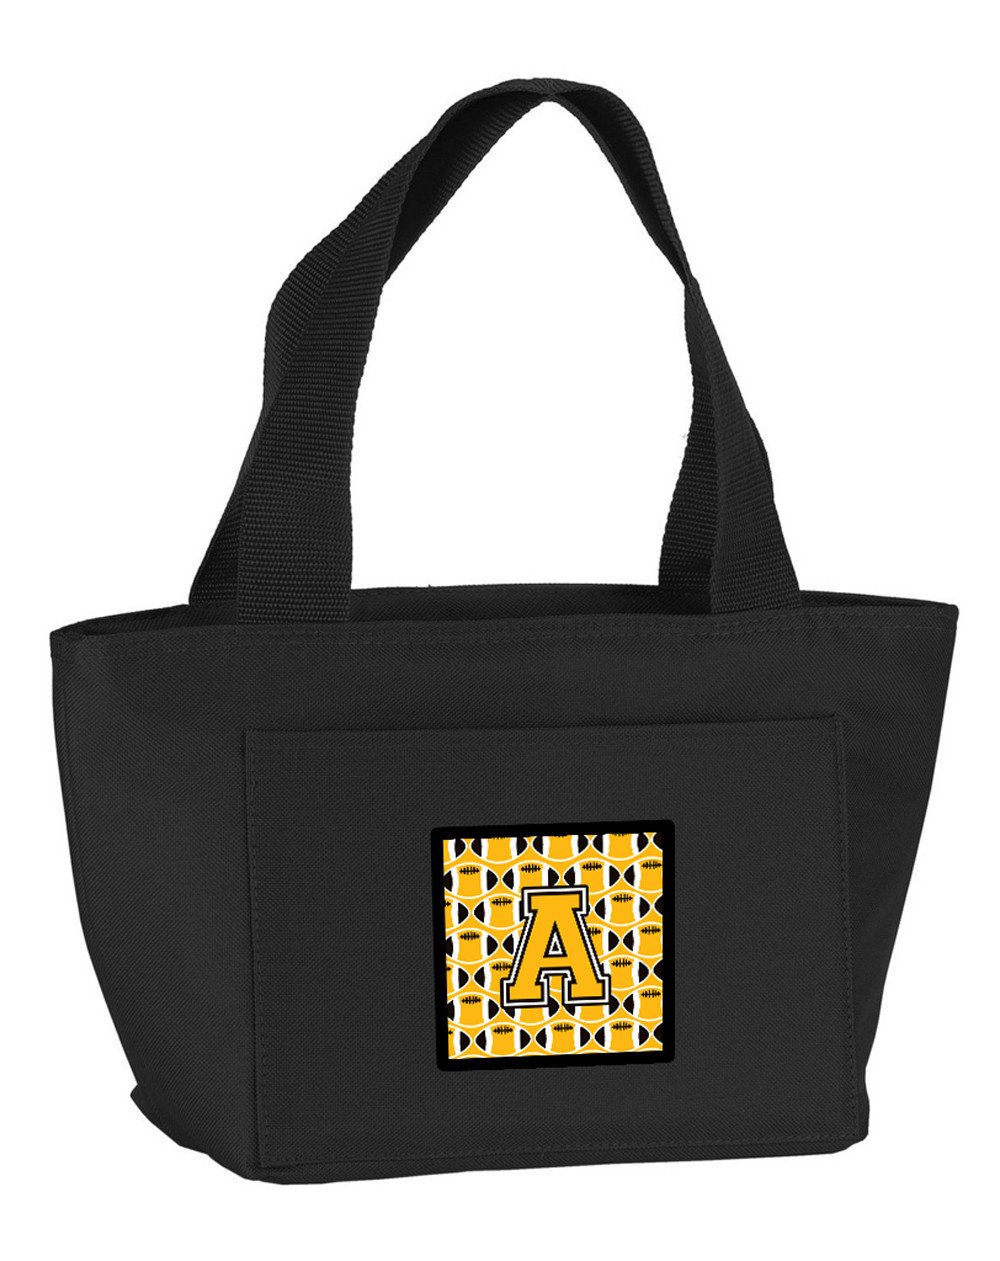 Letter A Football Black, Old Gold and White Lunch Bag CJ1080-ABK-8808 by Caroline's Treasures